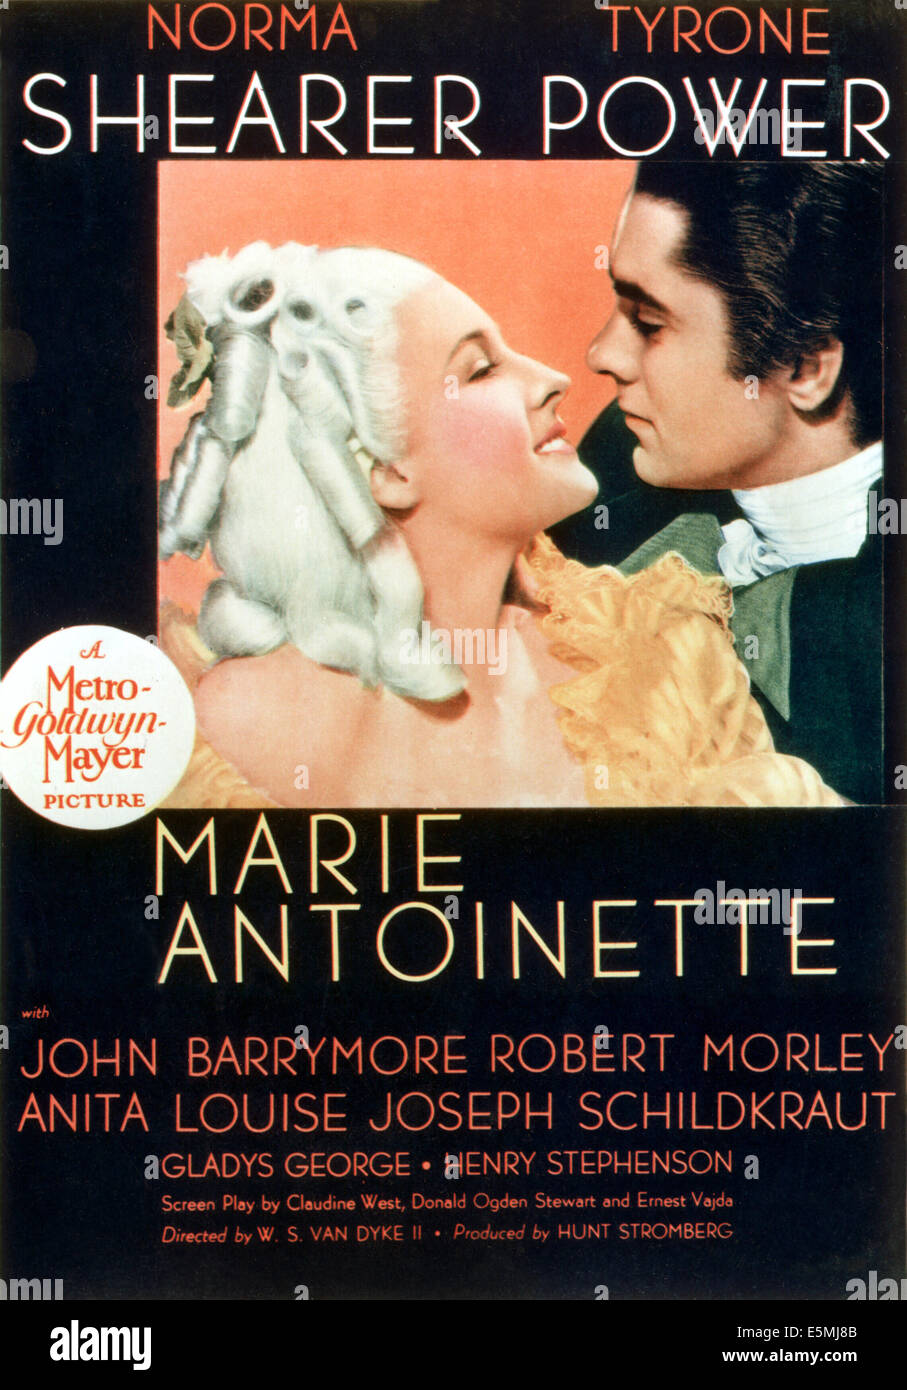 MARIE ANTOINETTE, Norma Shearer, Tyrone Power, 1938 Banque D'Images